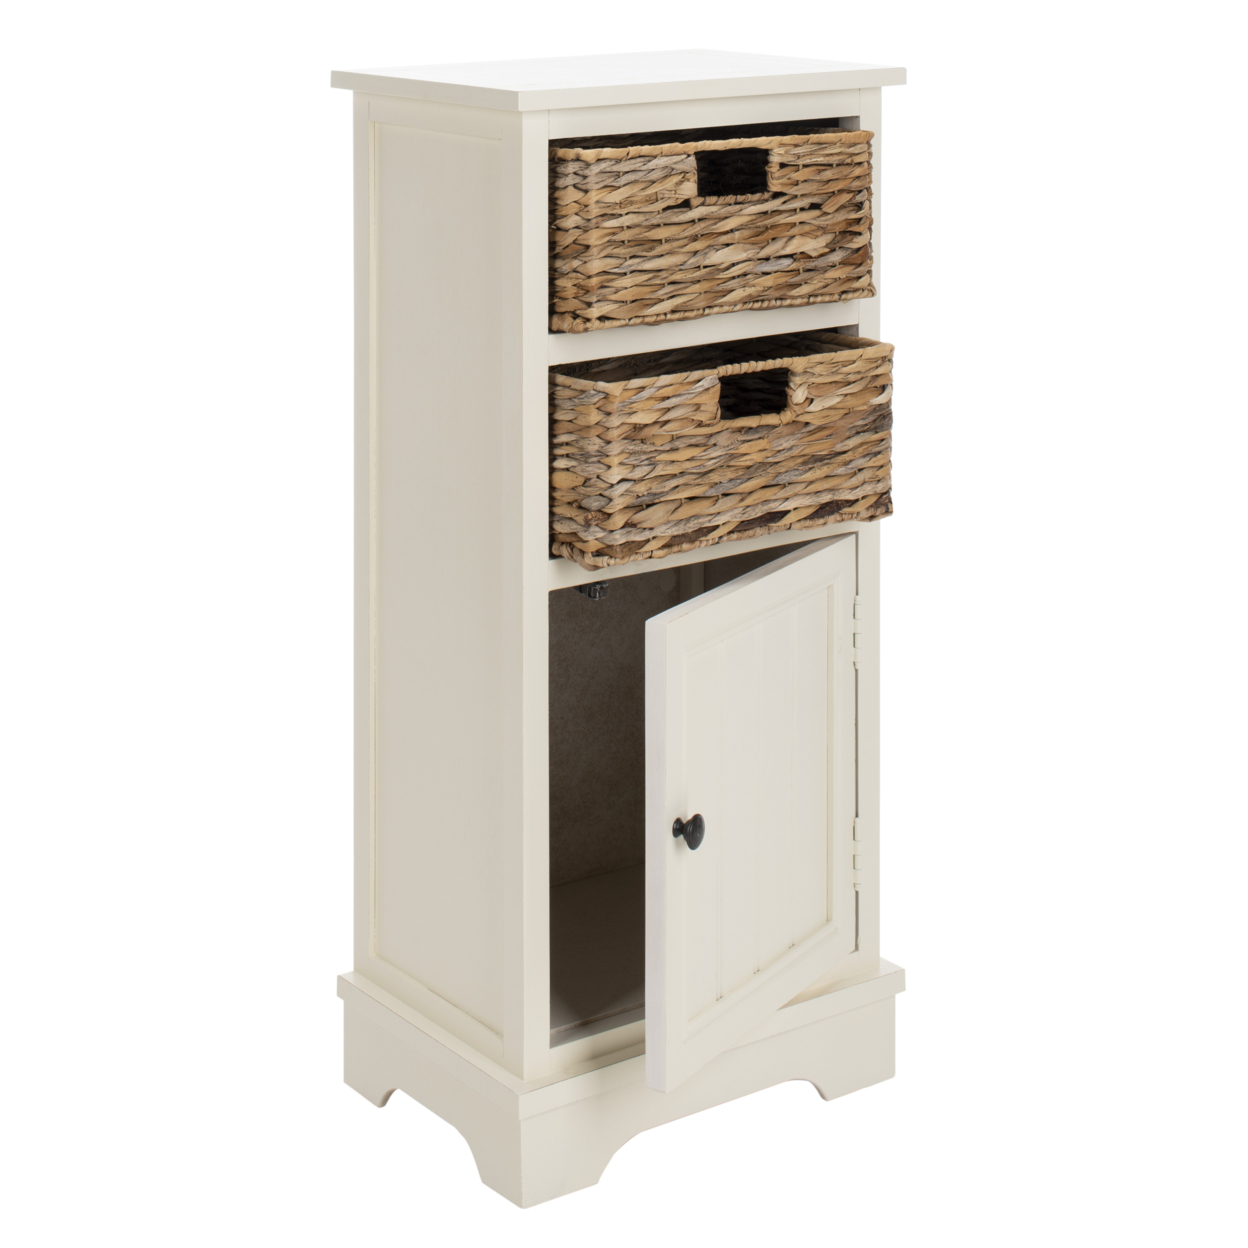 SAFAVIEH Connery Cabinet Vintage White